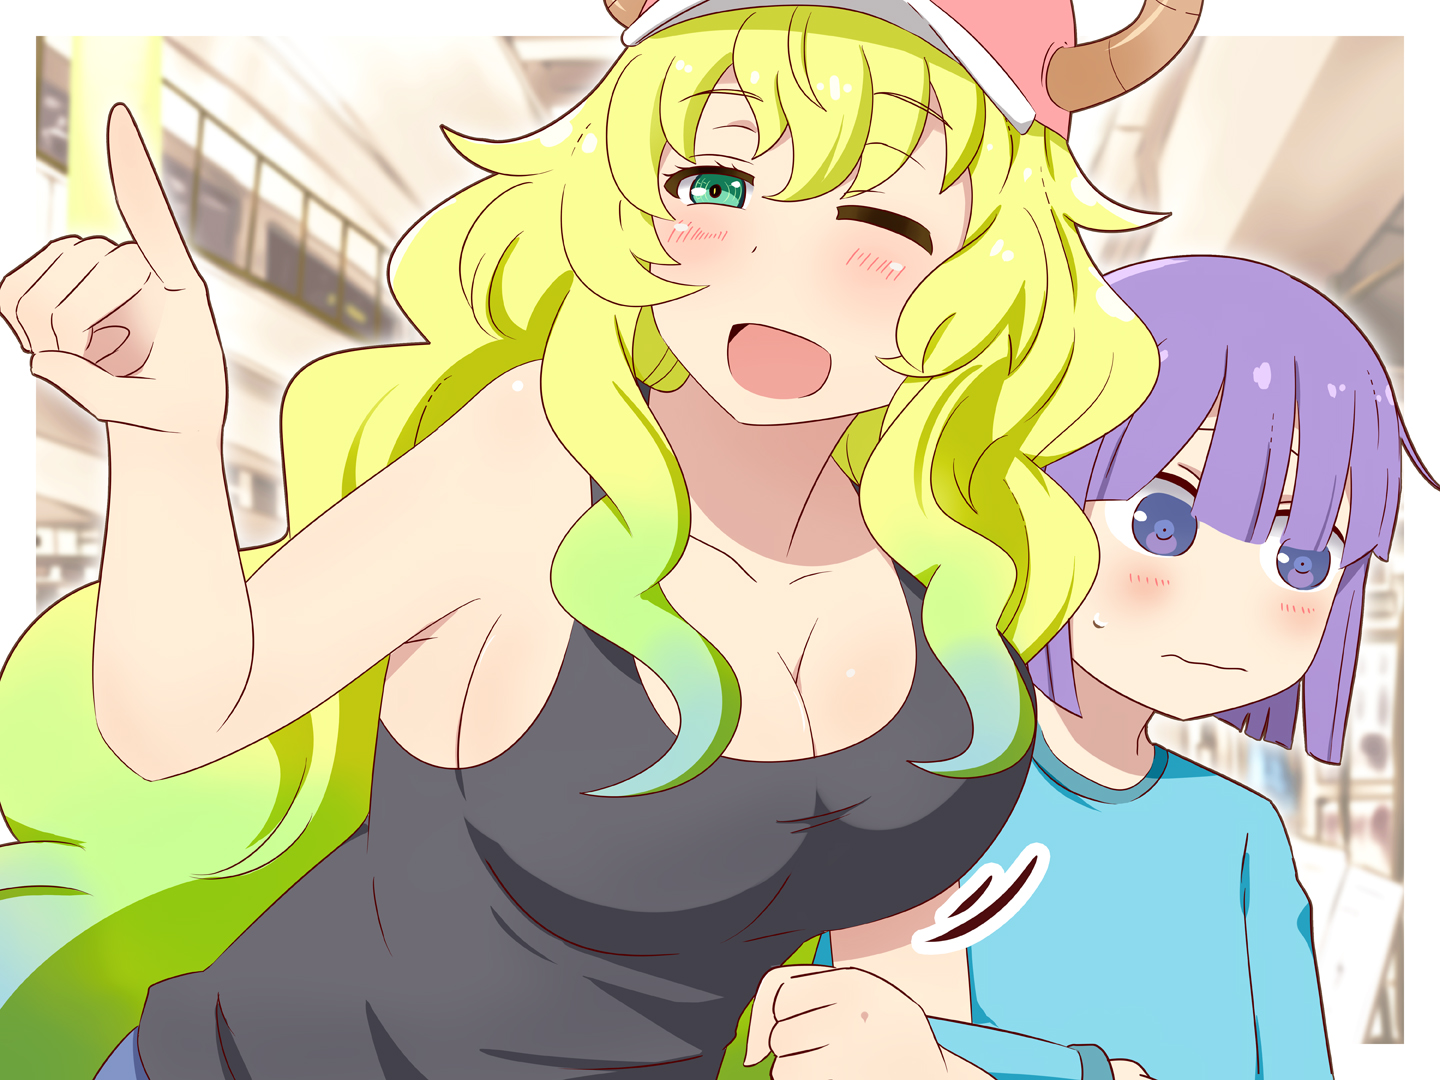 Lucoa and Shouta by ぐ ど ん.